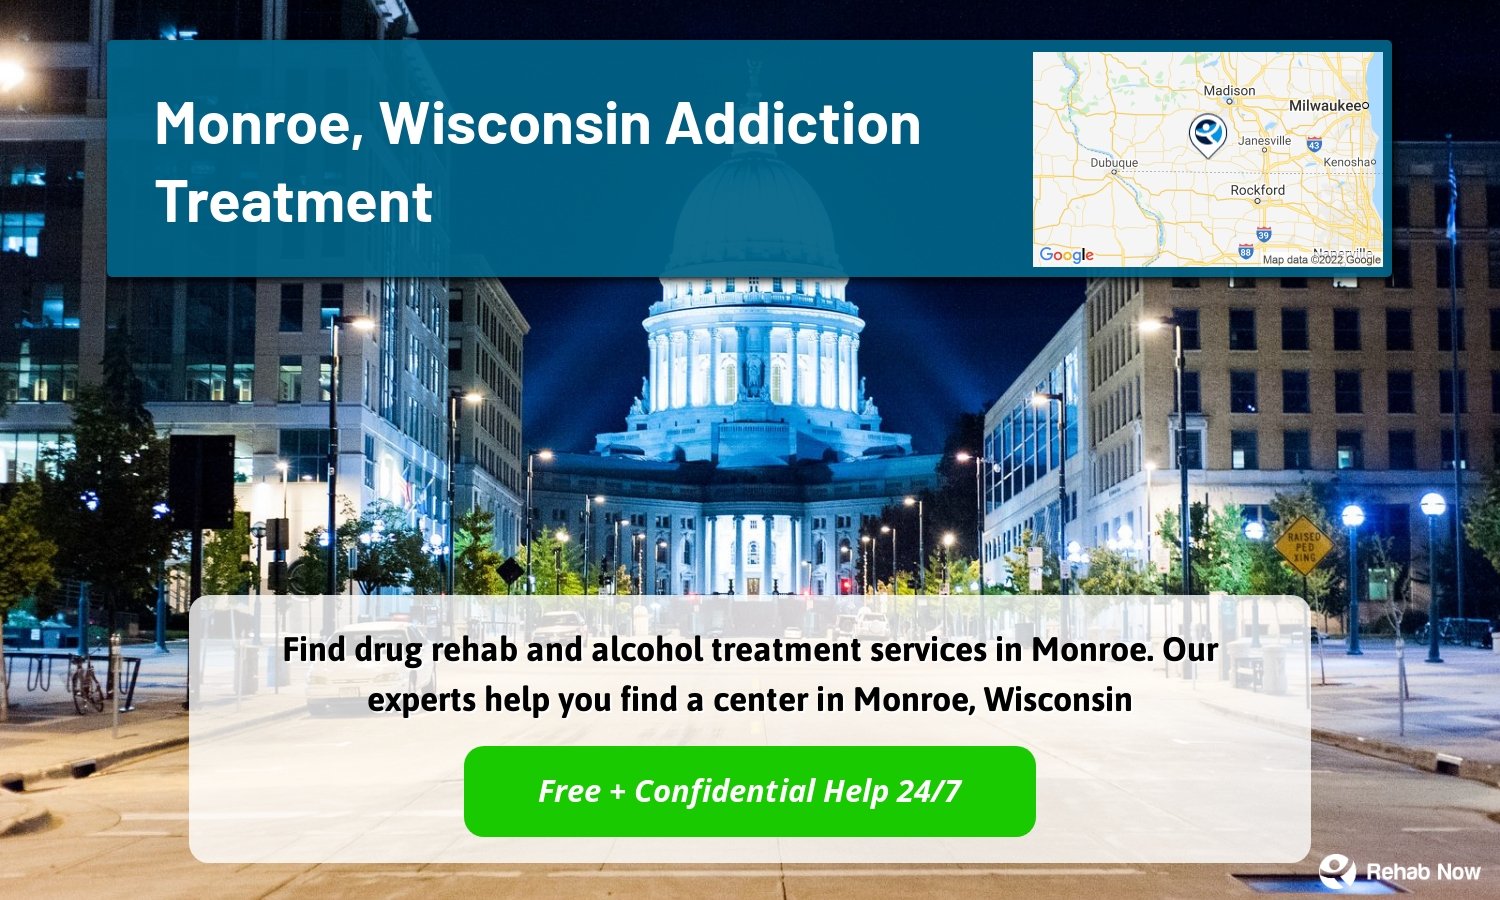 Find drug rehab and alcohol treatment services in Monroe. Our experts help you find a center in Monroe, Wisconsin